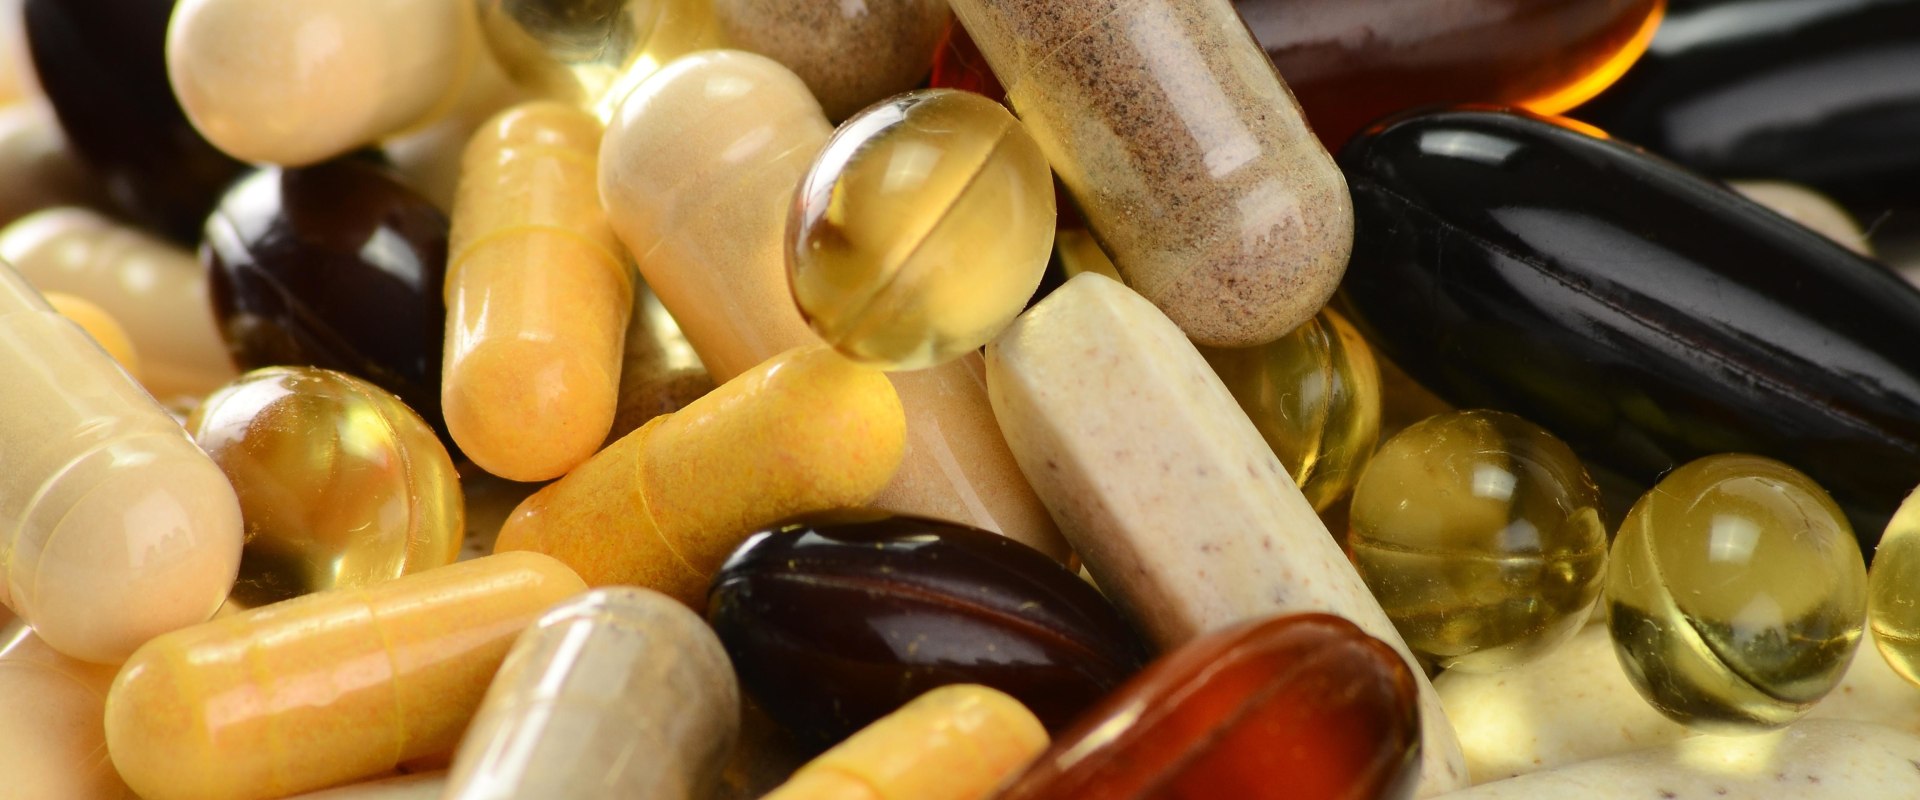 How Long Does it Take for Dietary or Herbal Supplements to Show Results?